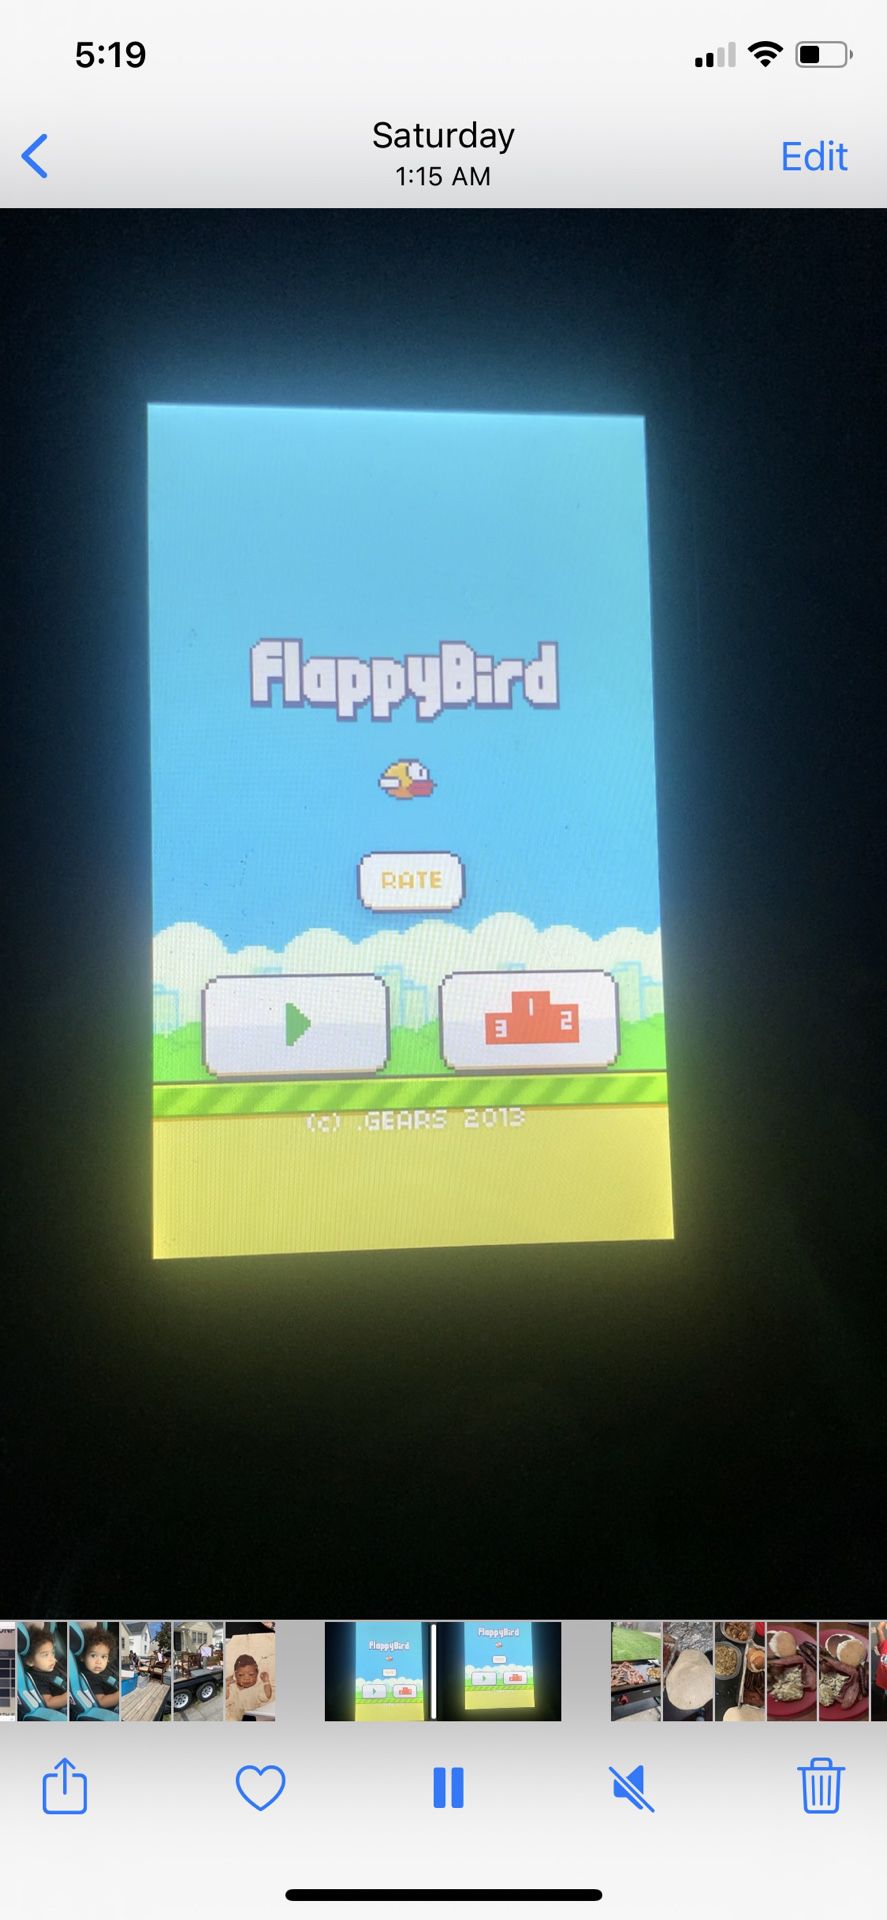 Original Flappy bird Game On Android Phone